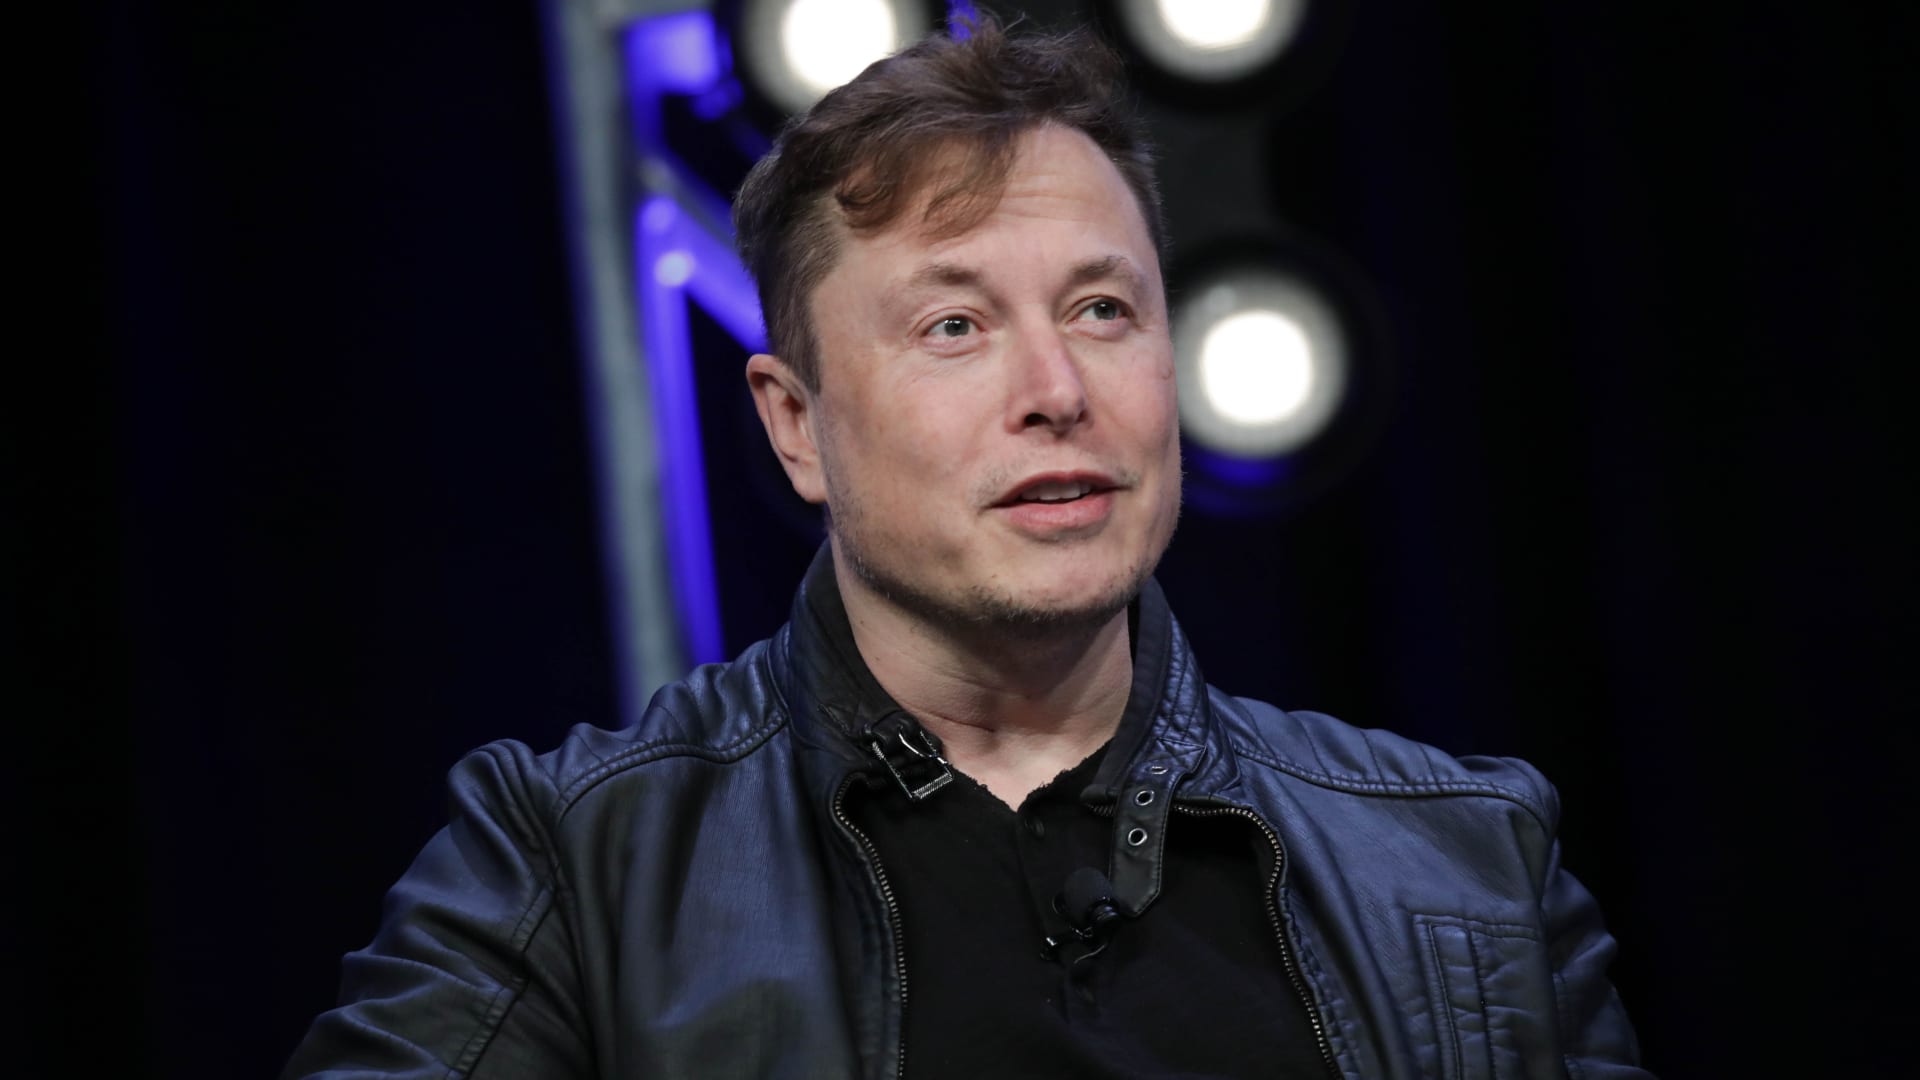 Elon Musk has criticized Apple for years. Apple has mostly ignored him – CNBC